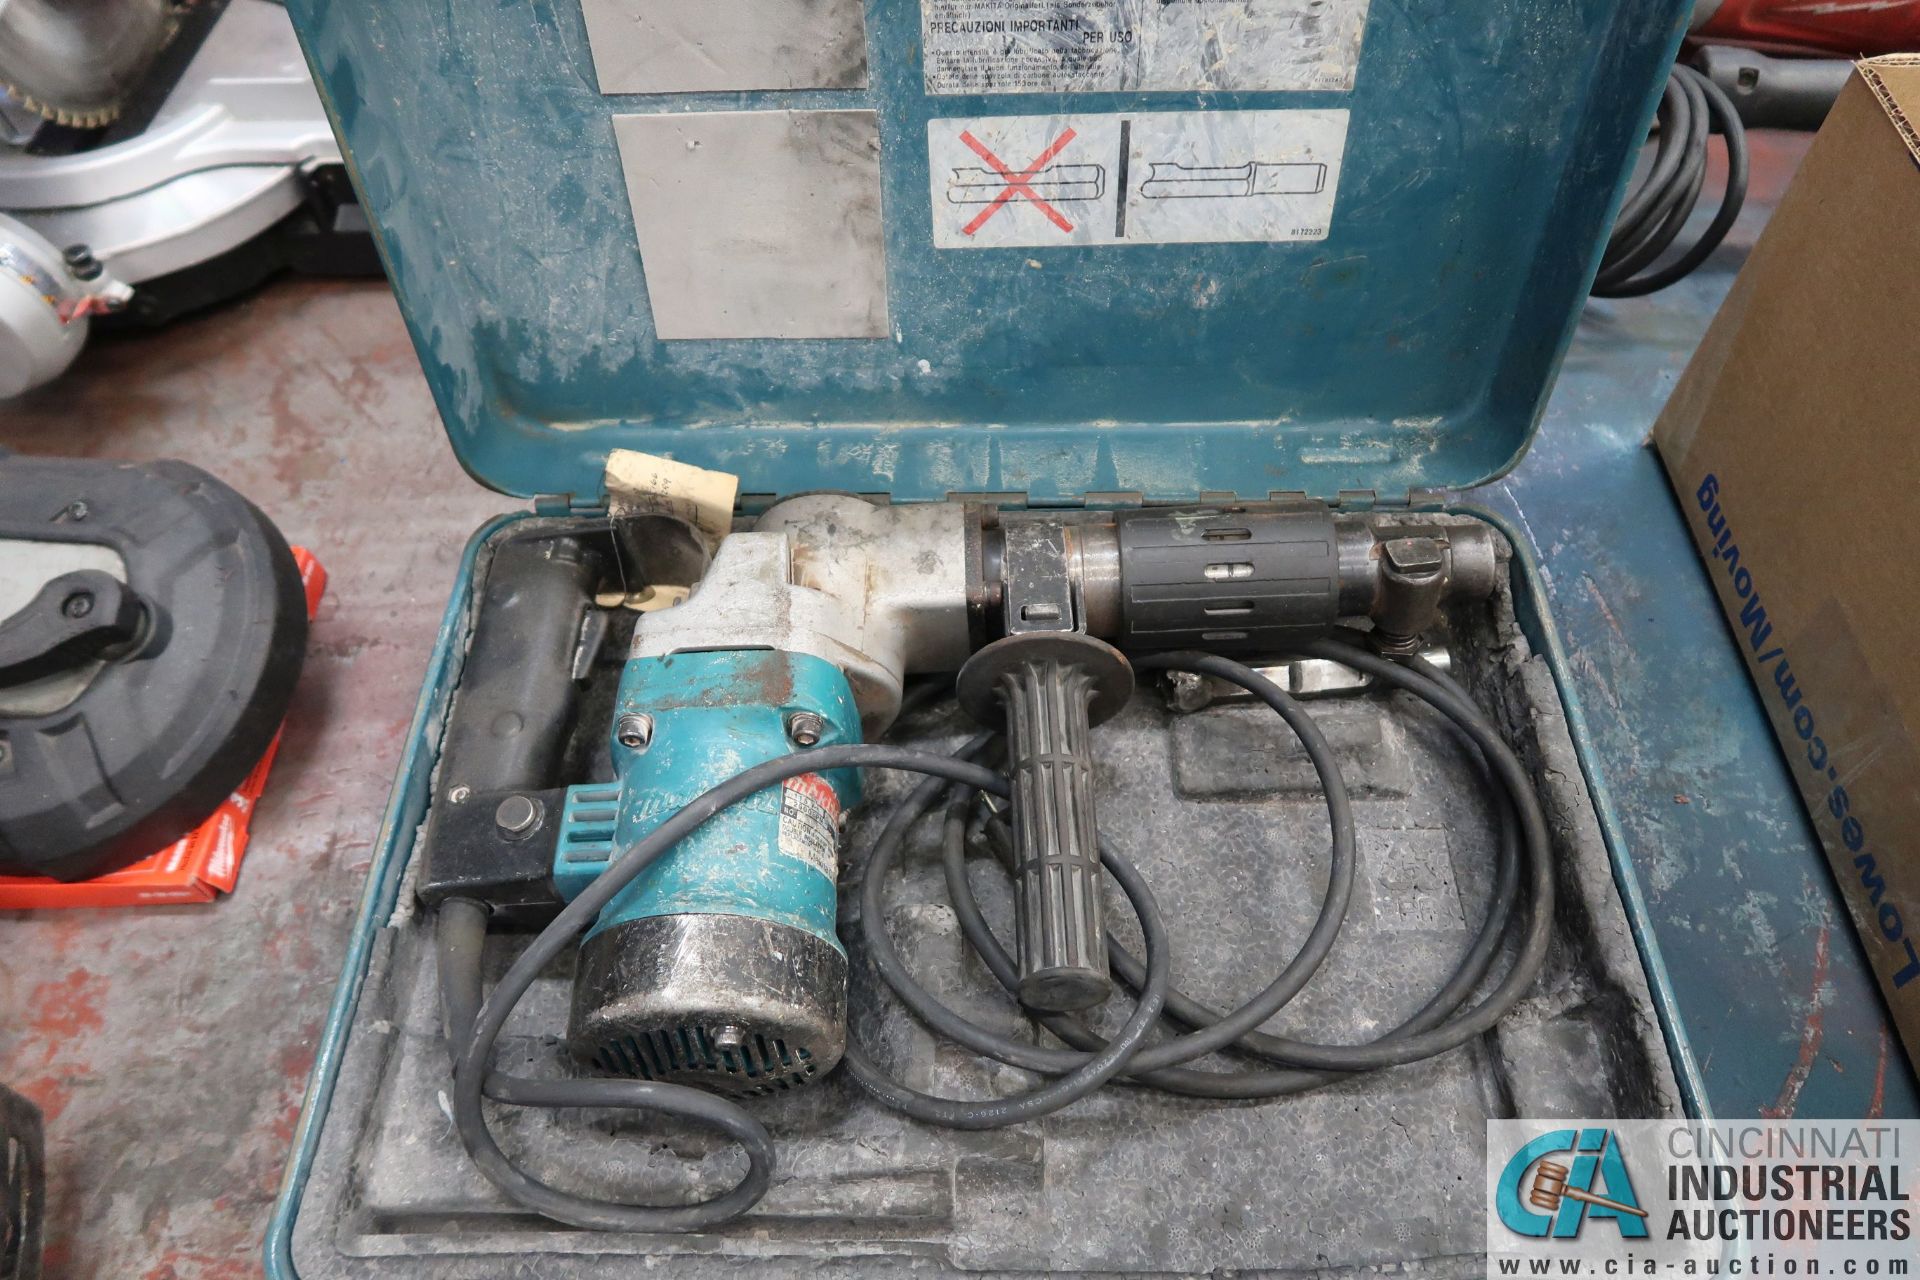 (LOT) MILWAUKEE DRILL, ANGLE DRILL AND MAKITA HAMMER DRILL - Image 4 of 4